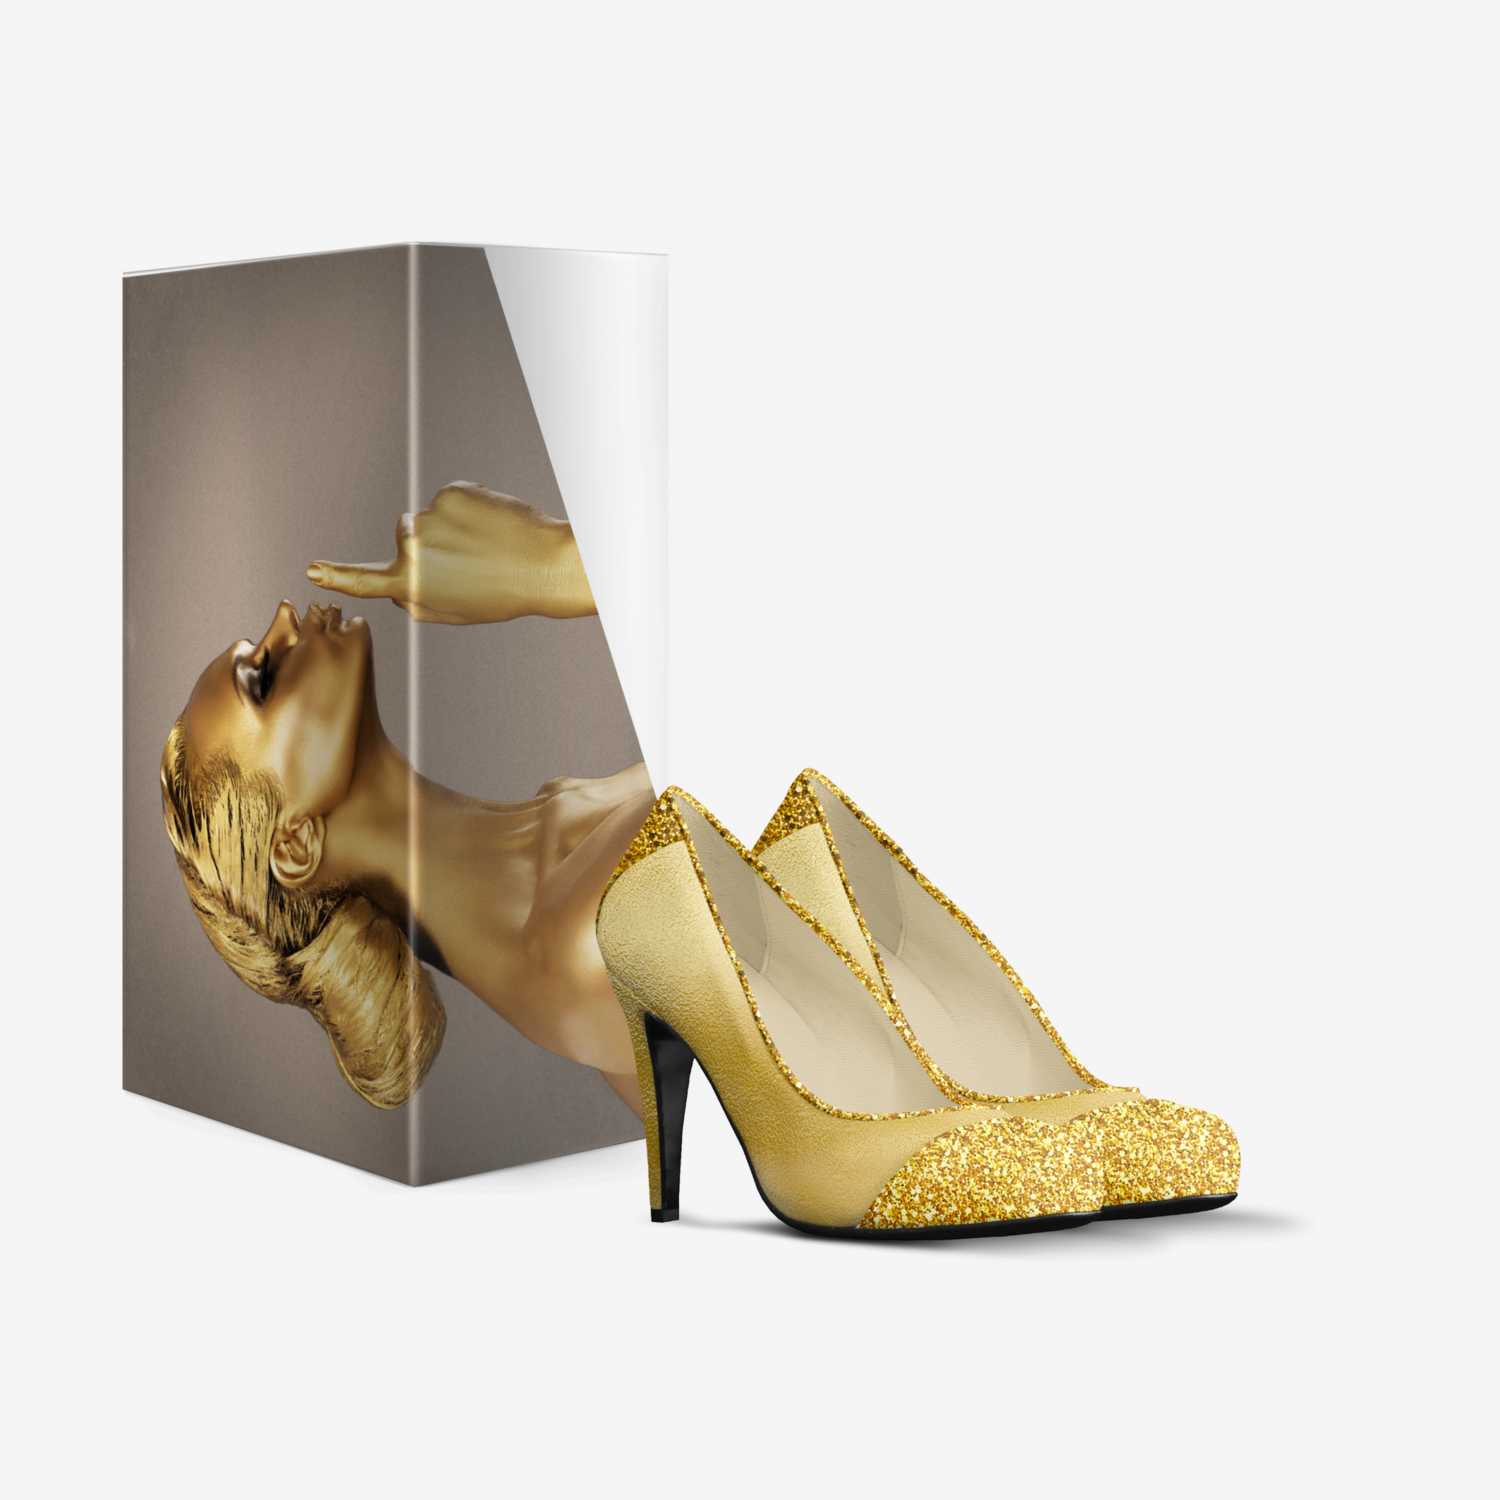 Golden Cream custom made in Italy shoes by Christian Sutter | Box view